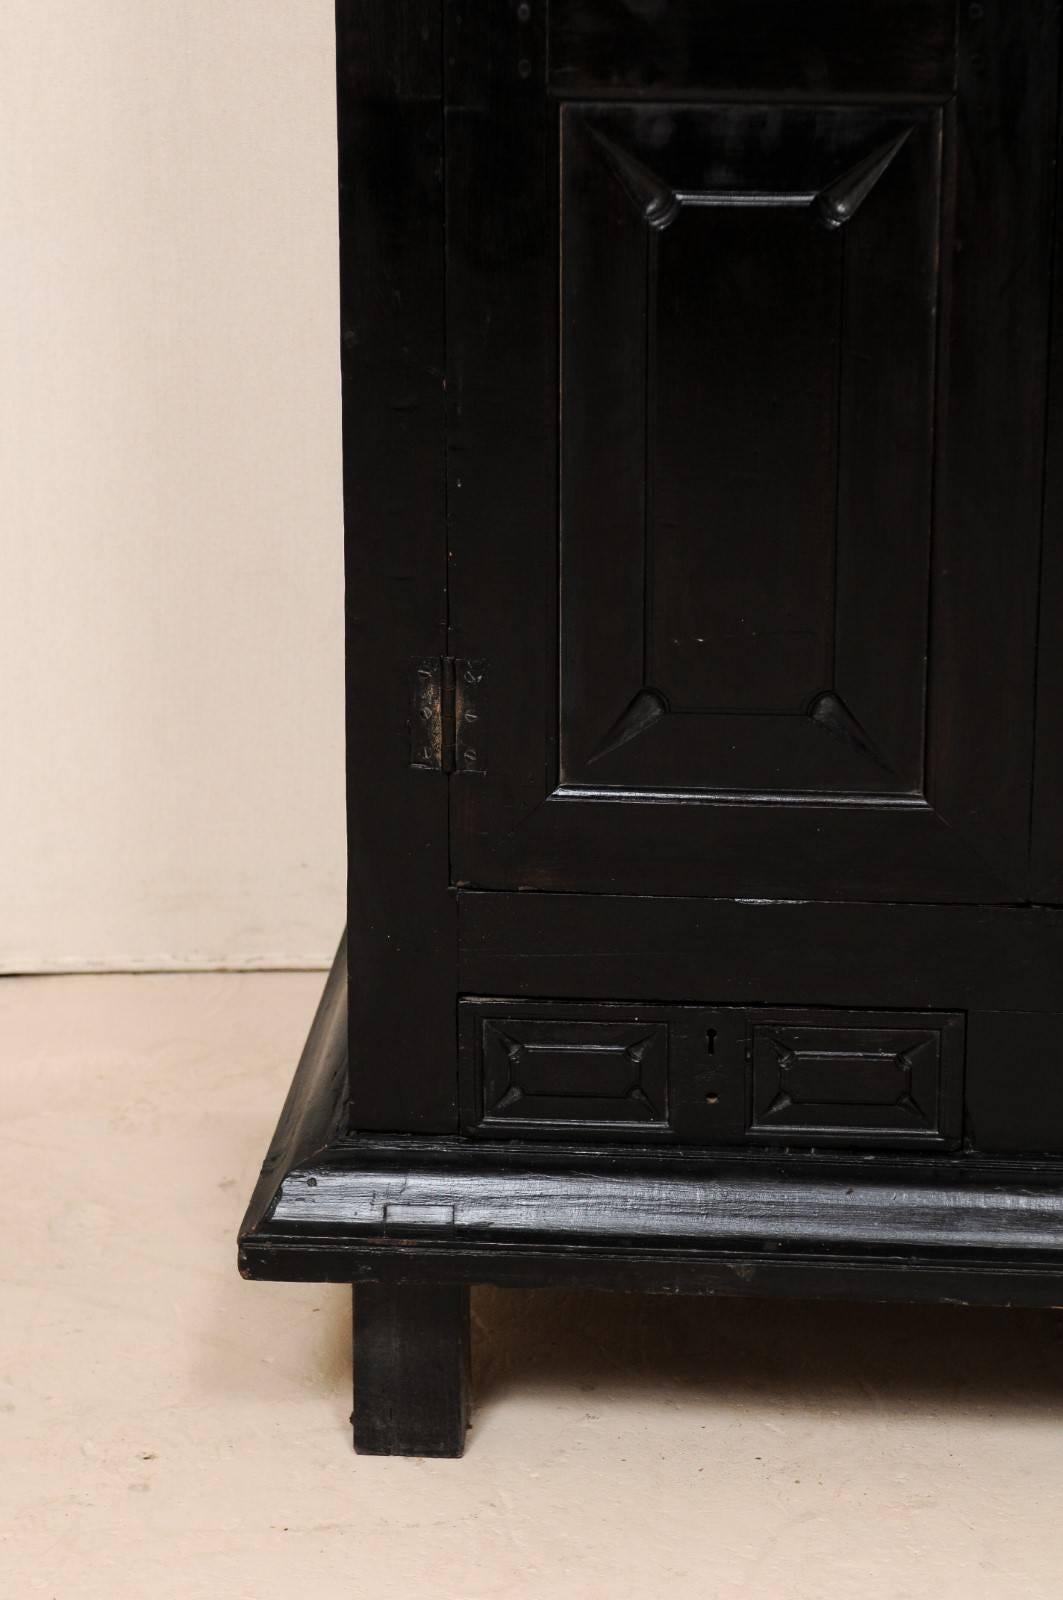 Carved British Colonial Ebonized Wood Cabinet w/Four Paneled Doors, 6 ft x 6.5 ft Tall 